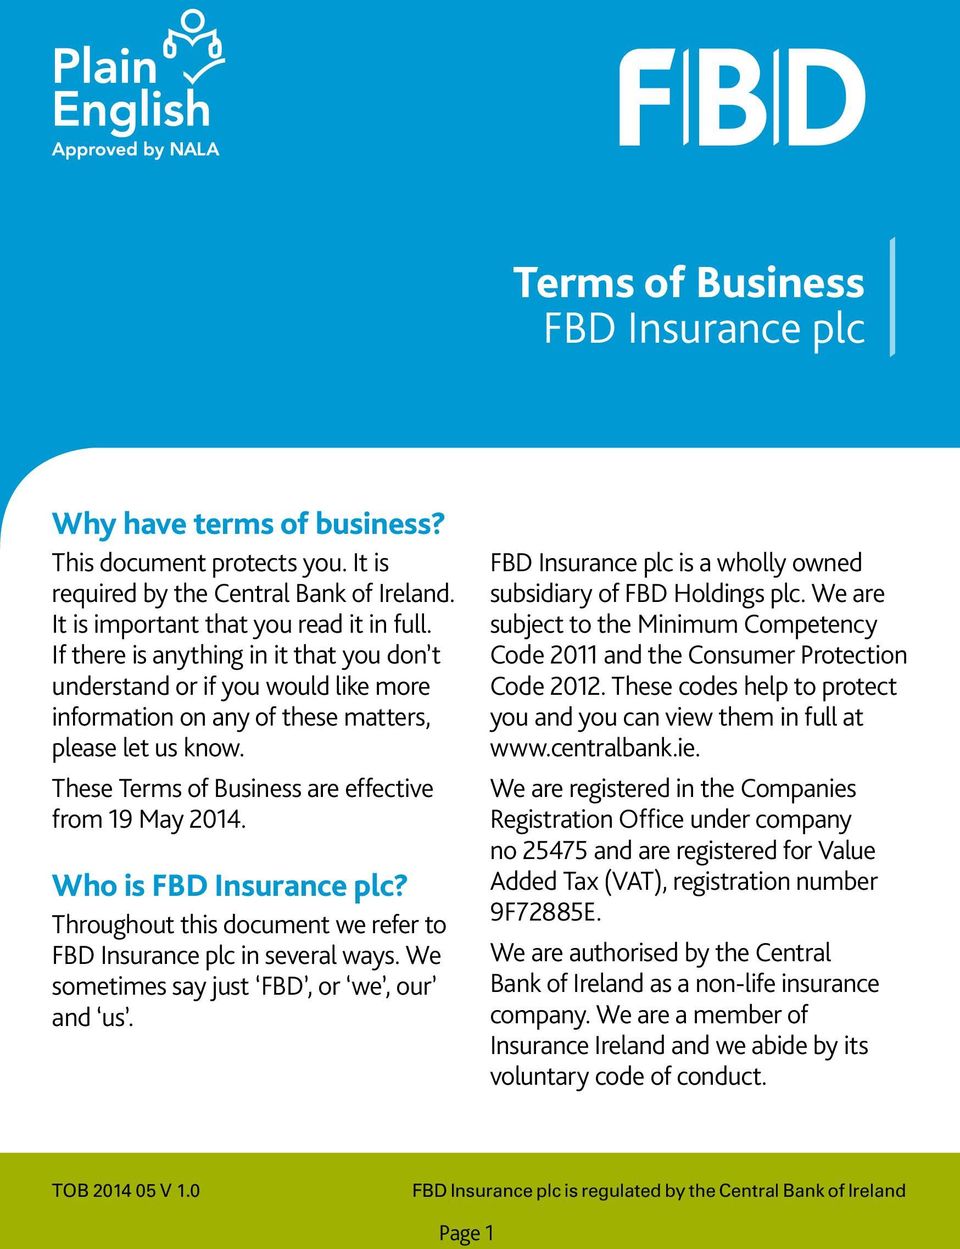 Who is FBD Insurance plc? Throughout this document we refer to FBD Insurance plc in several ways. We sometimes say just FBD, or we, our and us.